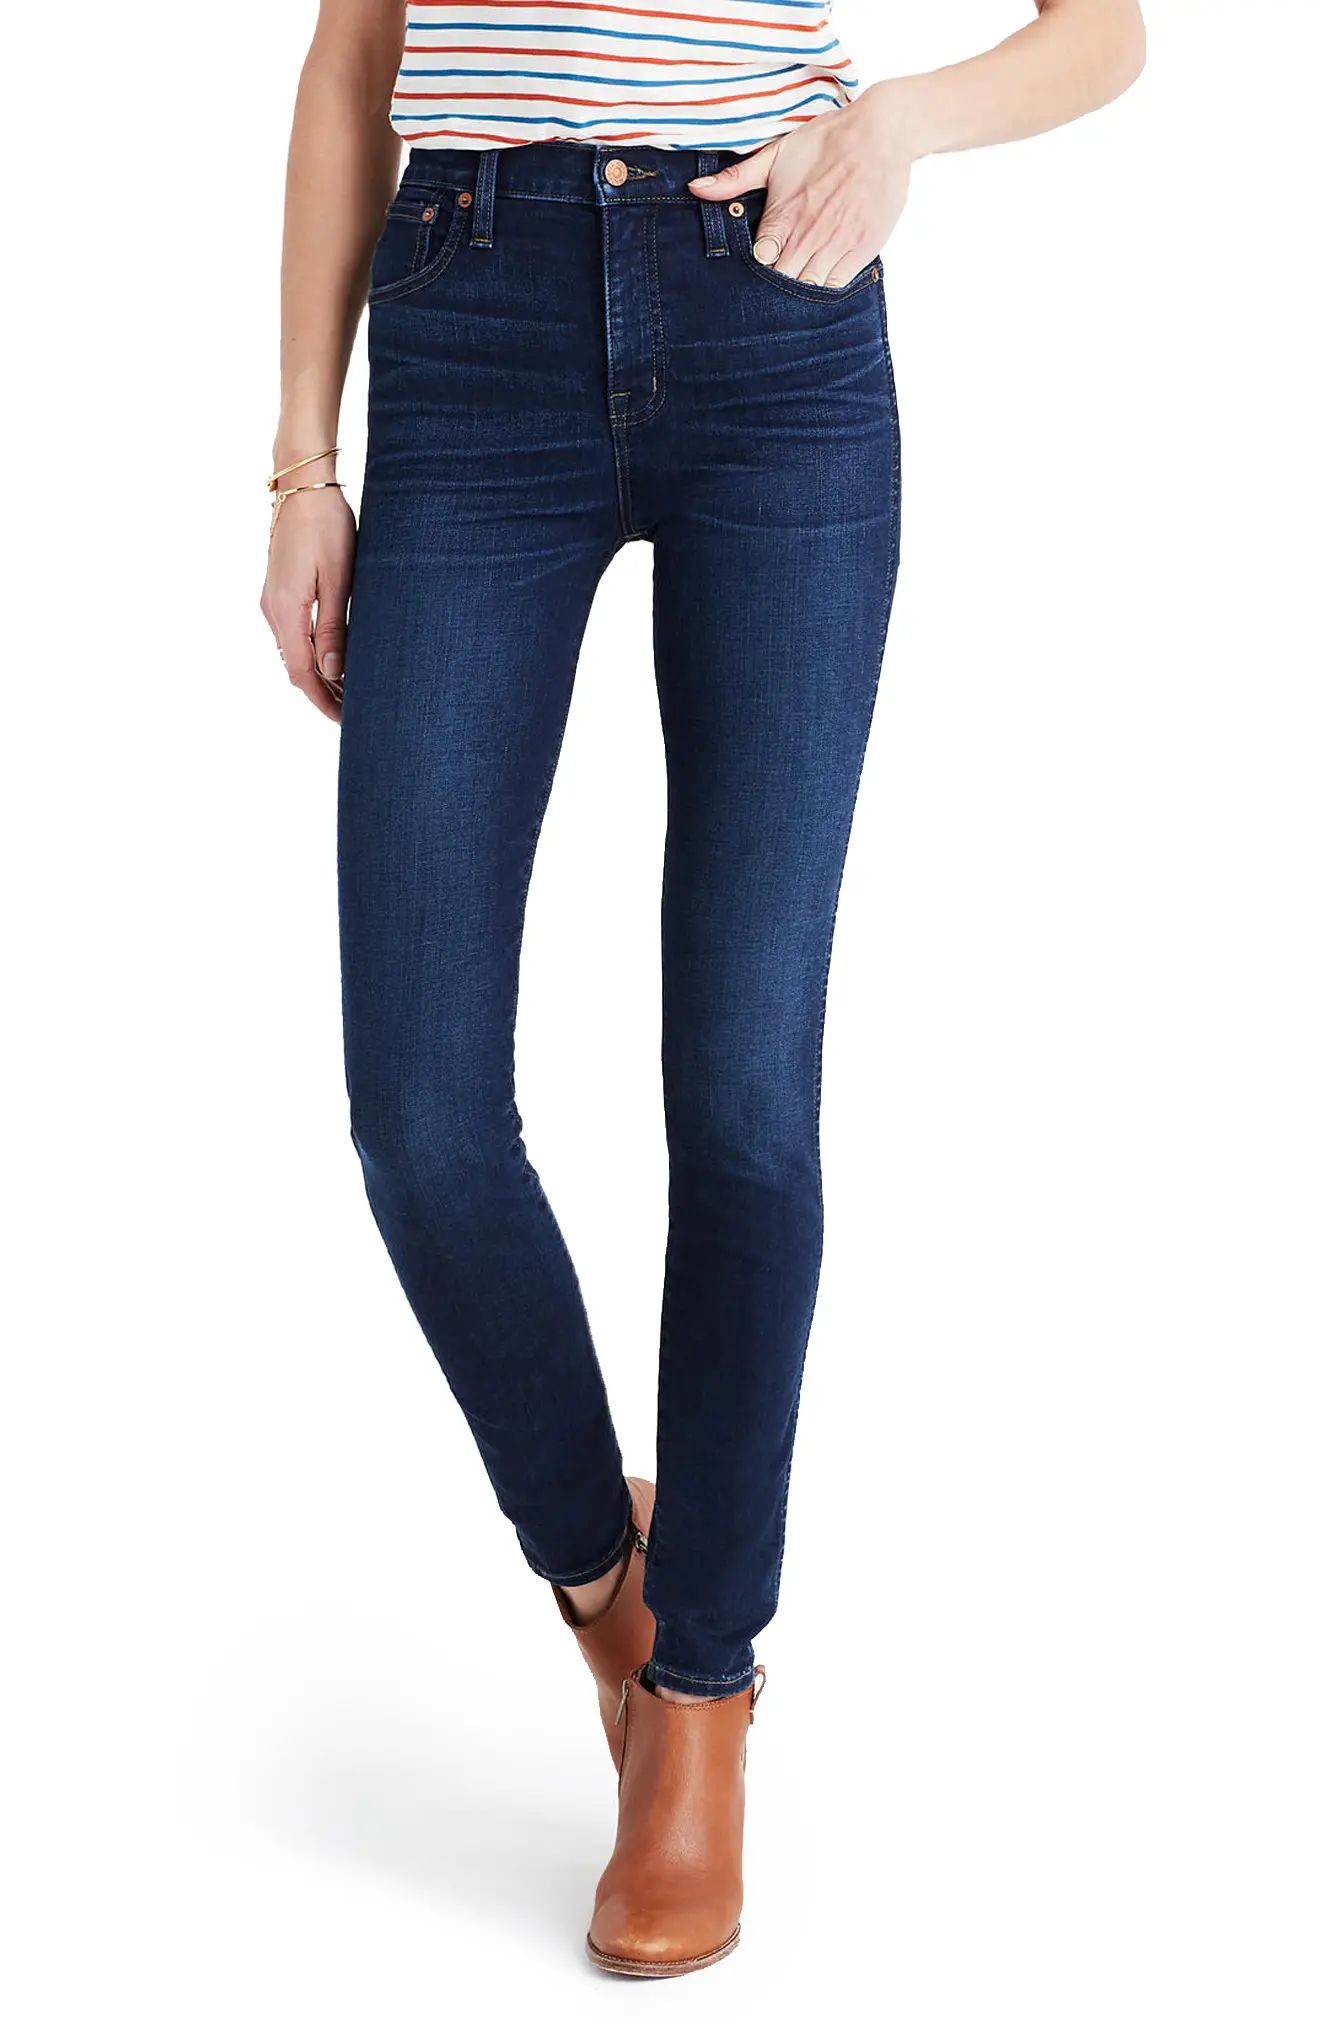 Madewell 10-Inch High Rise Skinny Jeans in Hayes Wash at Nordstrom, Size 25Tall | Nordstrom